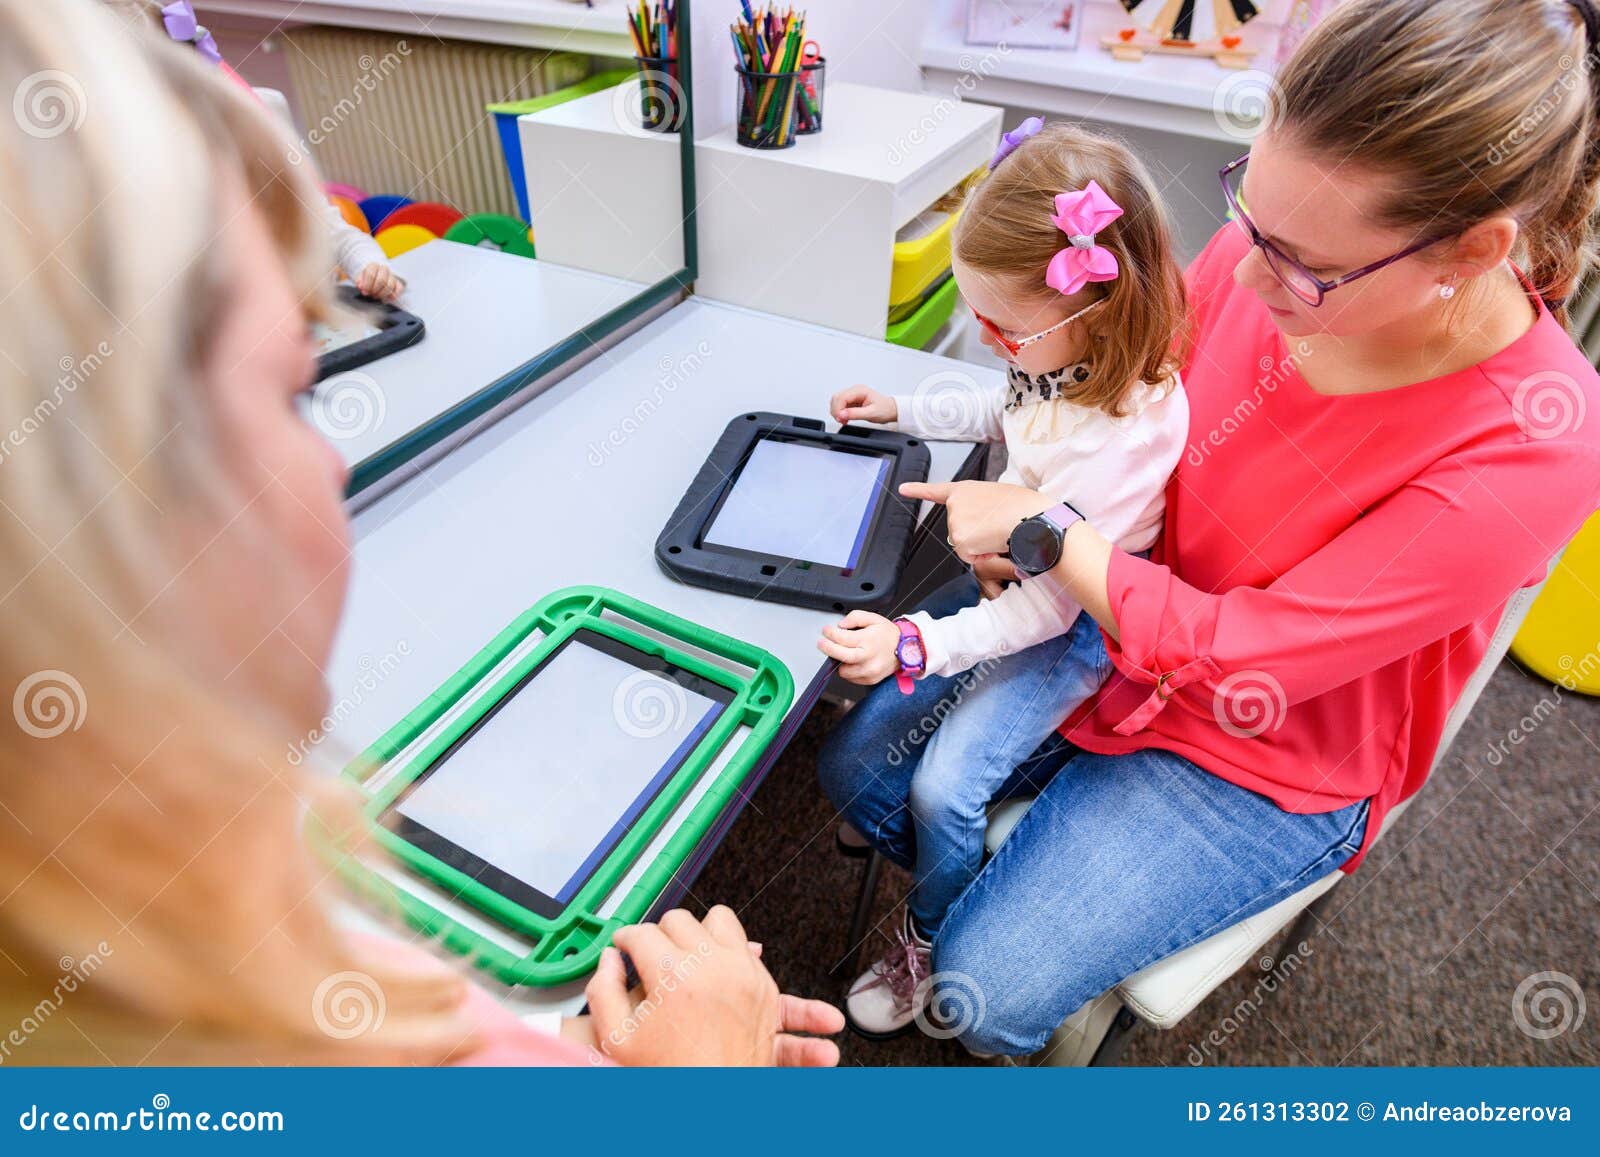 non-verbal girl living with cerebral palsy, learning to use digital tablet device to communicate.